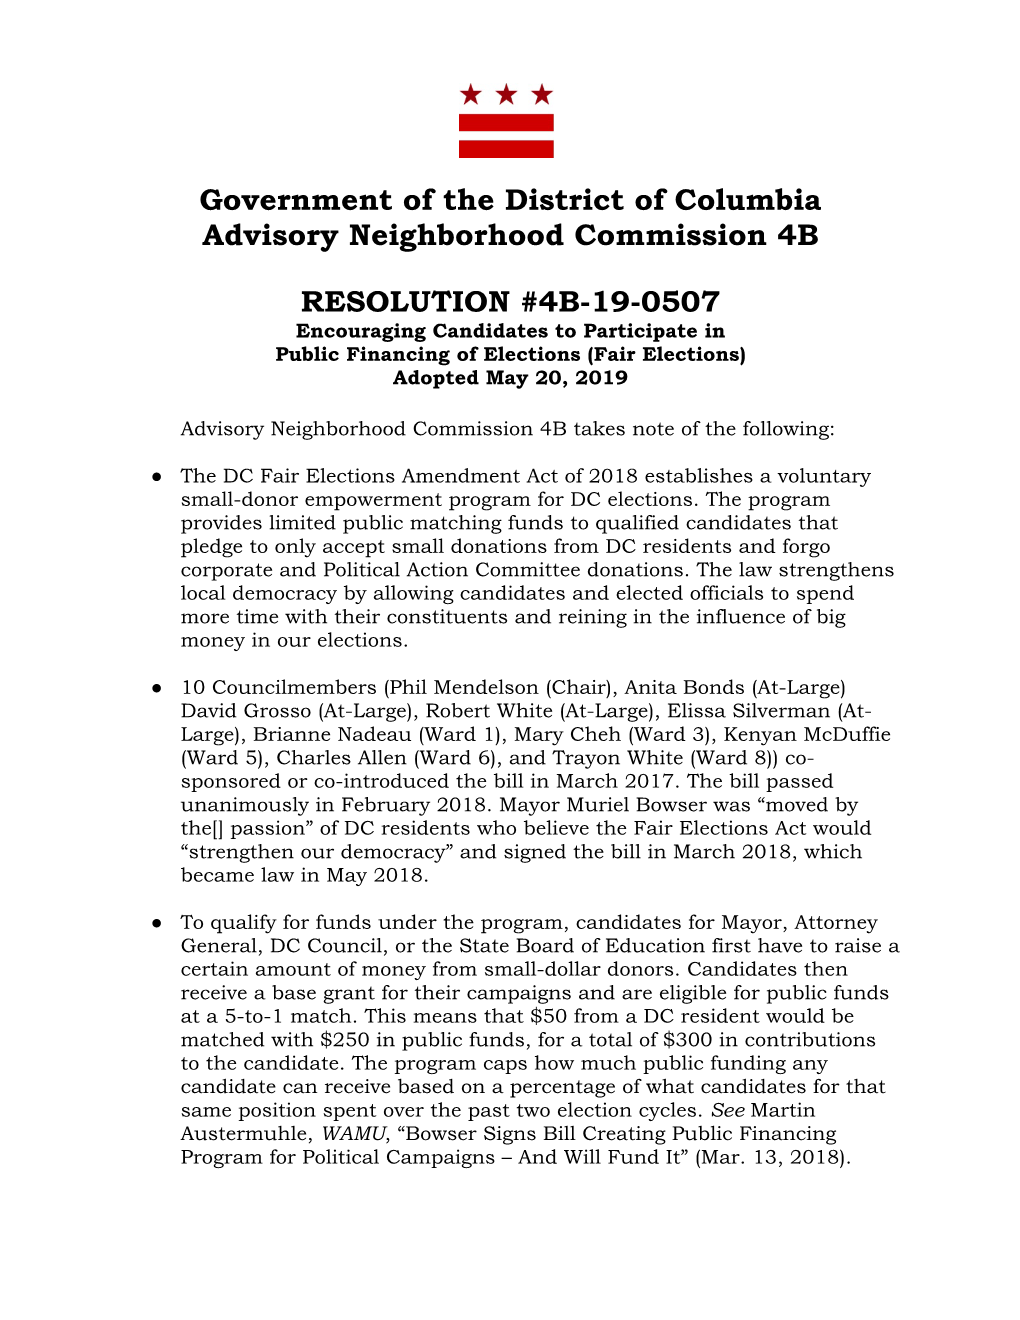 Government of the District of Columbia Advisory Neighborhood Commission 4B